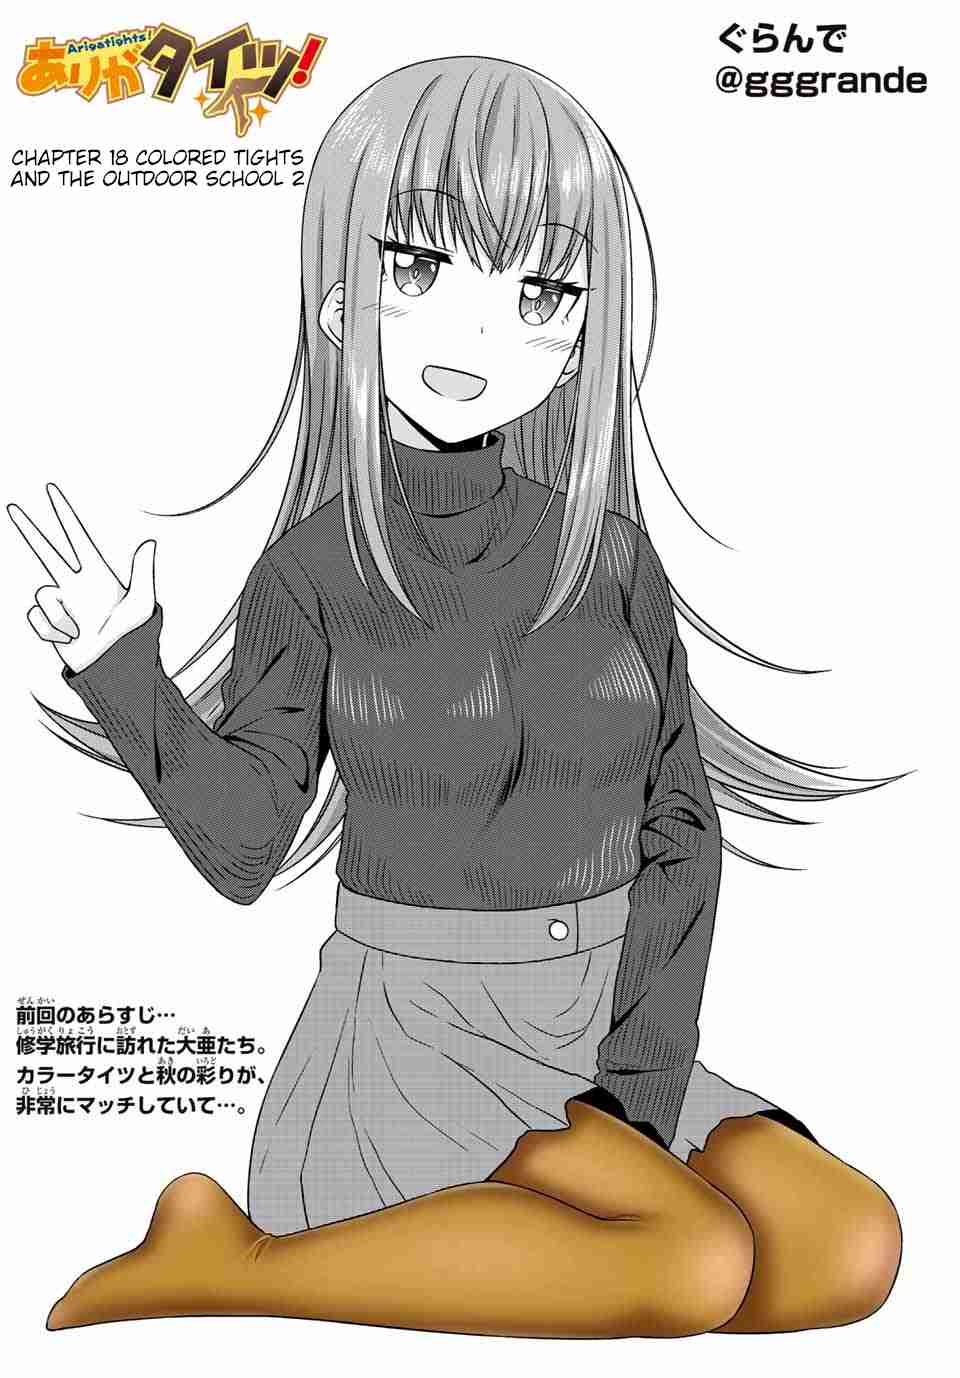 Arigatights! Vol. 2 Ch. 18 Colored Tights And The Outdoor School 2